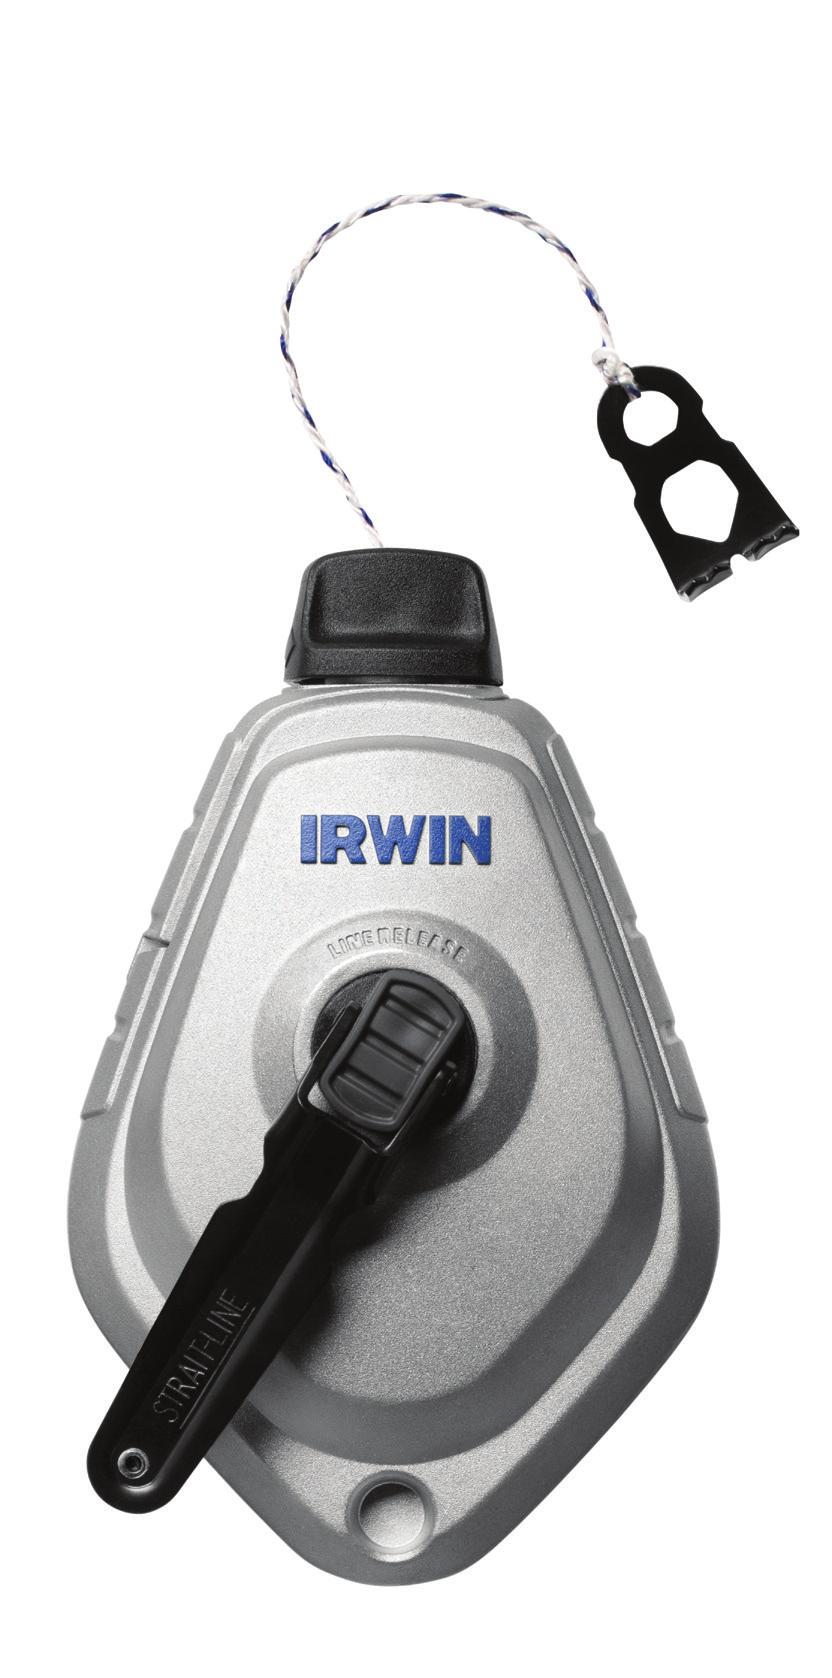 IRWIN STRAIT-LINE IRWIN STRAIT-LINE has manufactured chalk reels designed with the end-user in mind for more than 50 years.